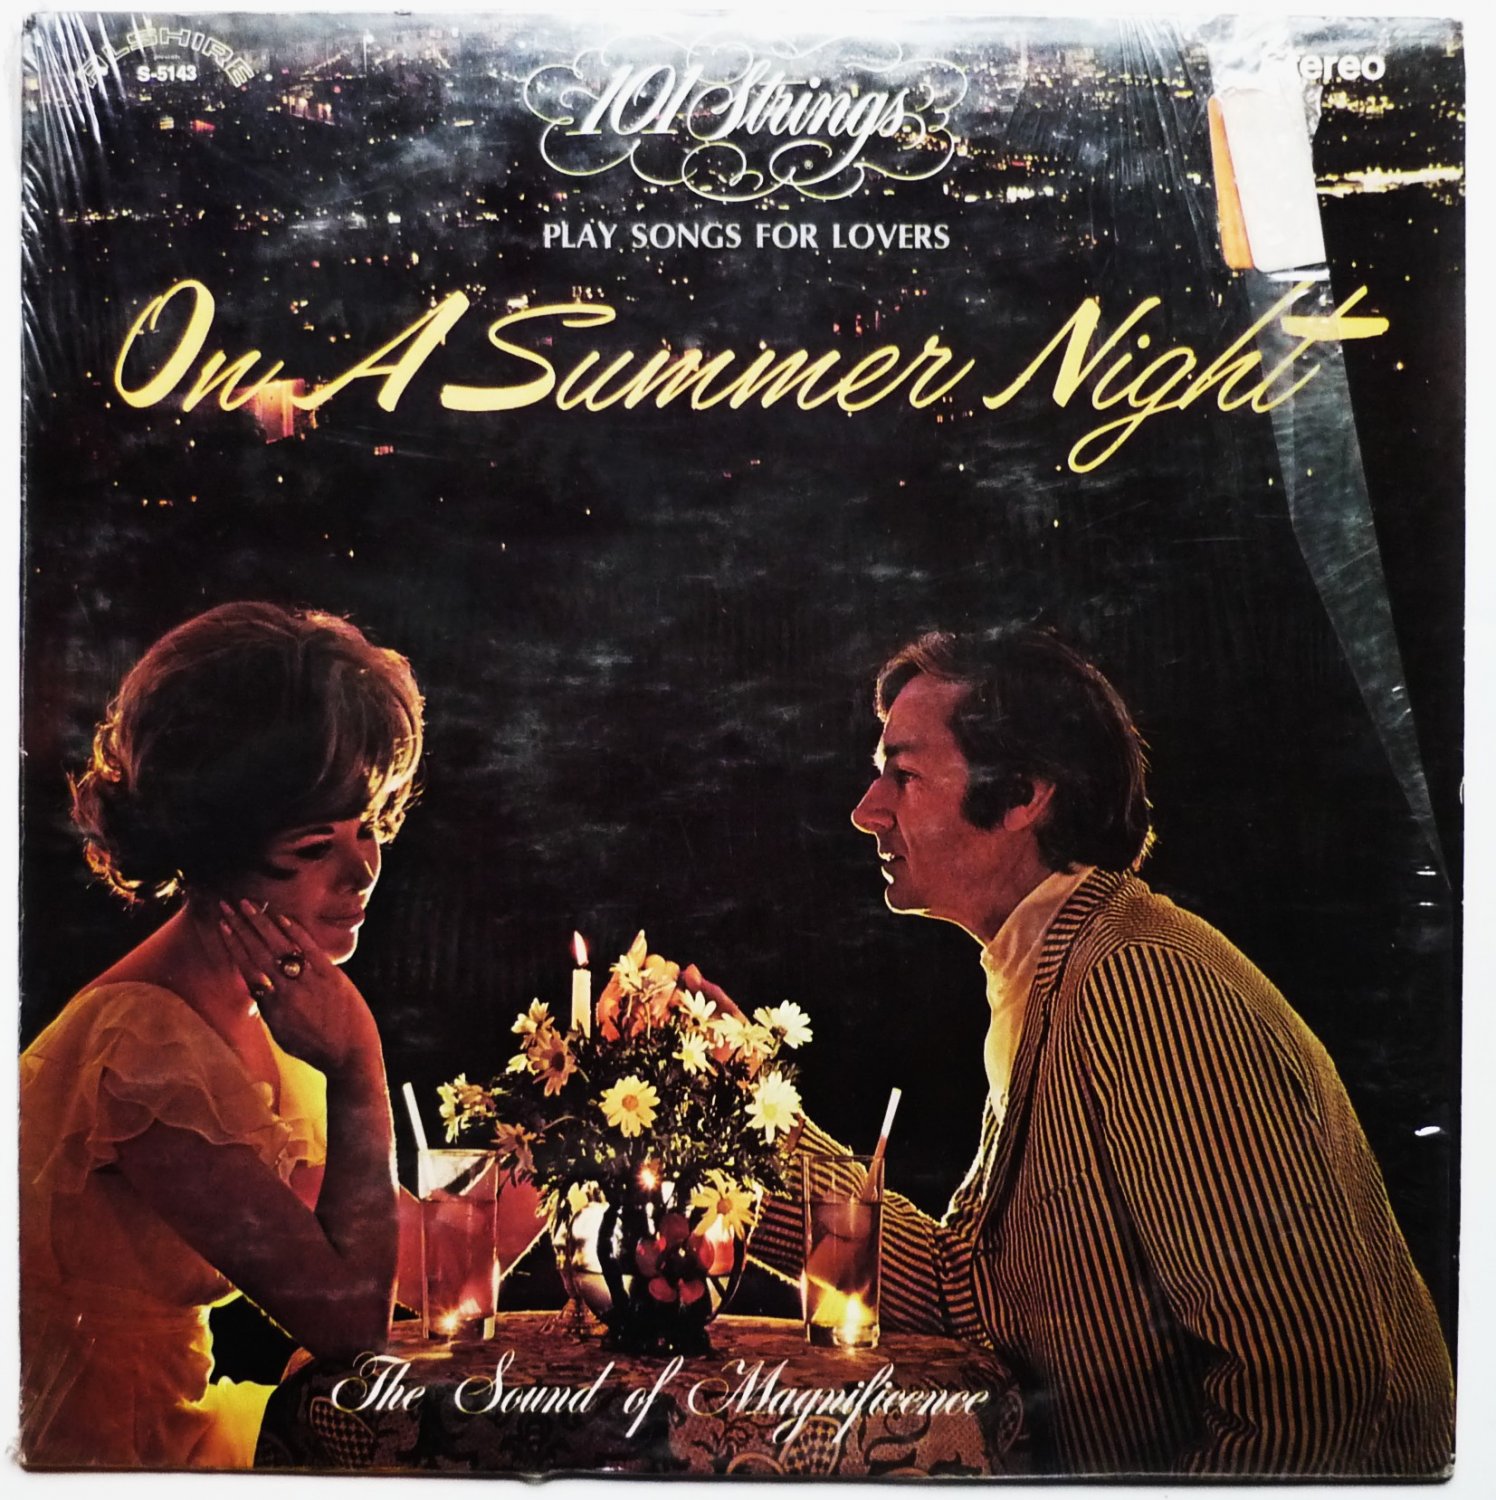 On a Summer Night 101 Strings Plays Songs for Lovers lp